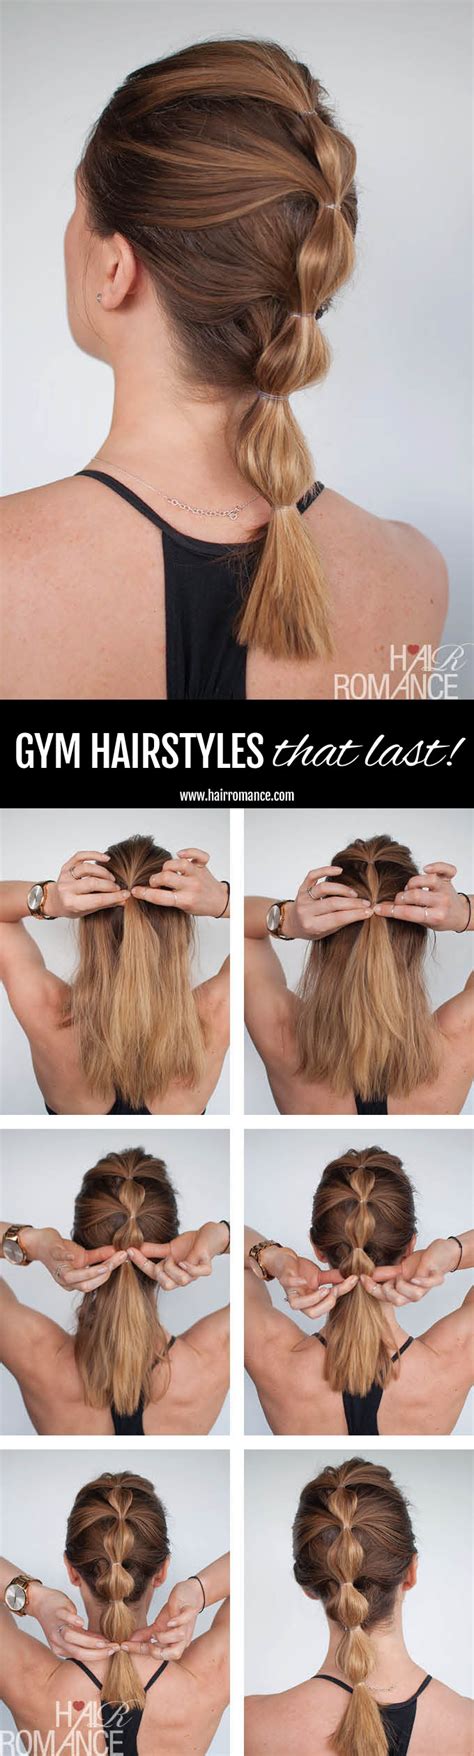 Cute Hairstyles For Working Out Easy Hairstyles For Working Out Gym